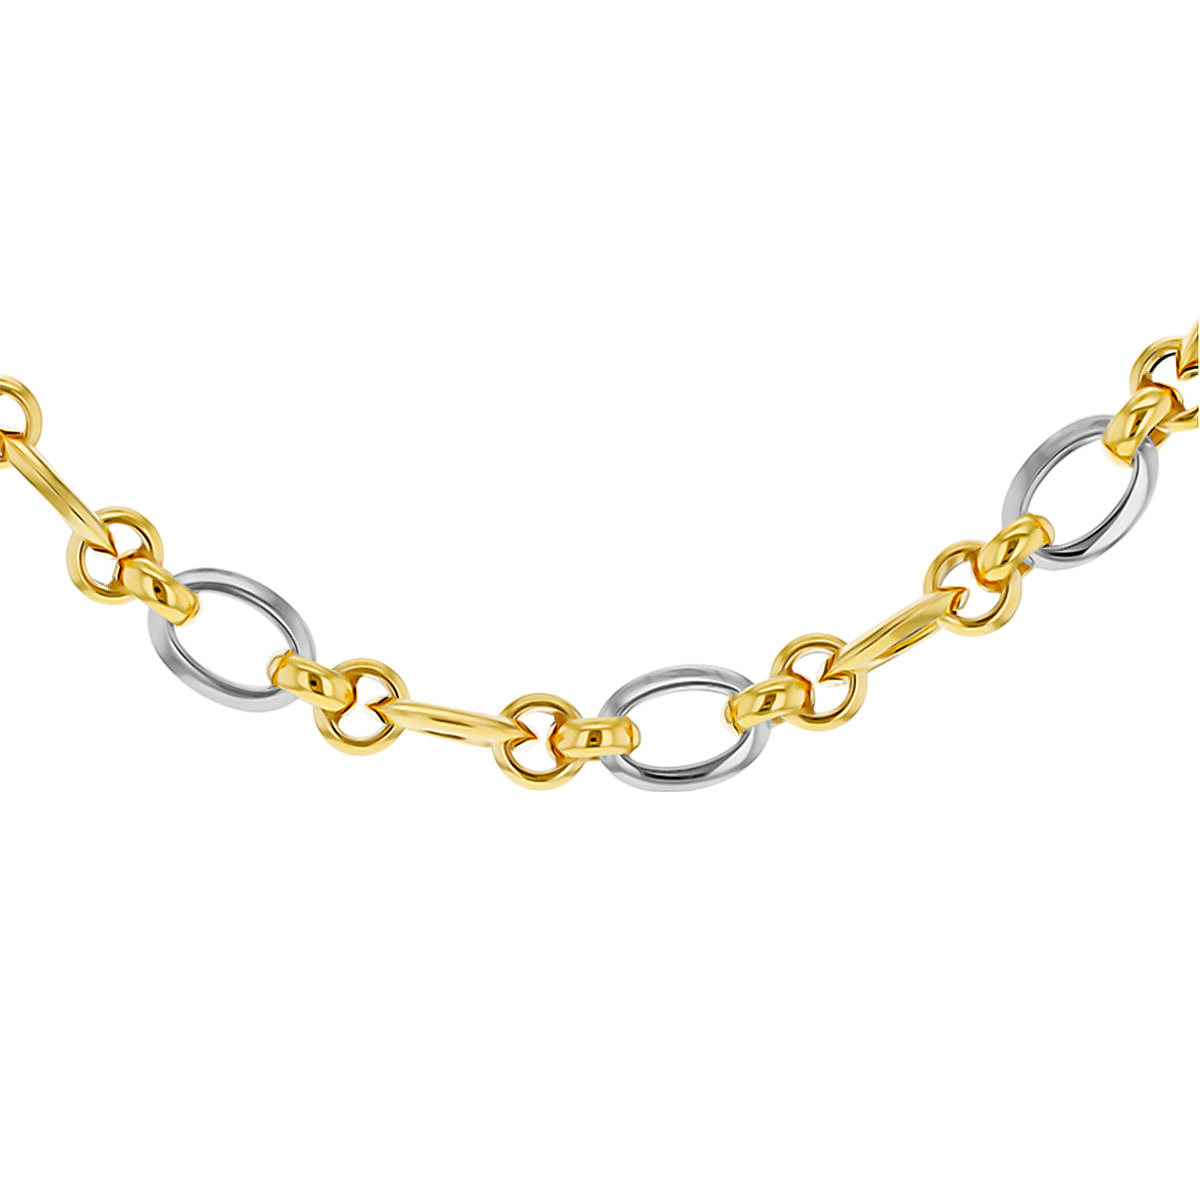 Vicenza Show Stopper- 9K Yellow & White Gold Oval & Round Link Necklace (Size - 17.5), Gold Wt. 9.70 Gms